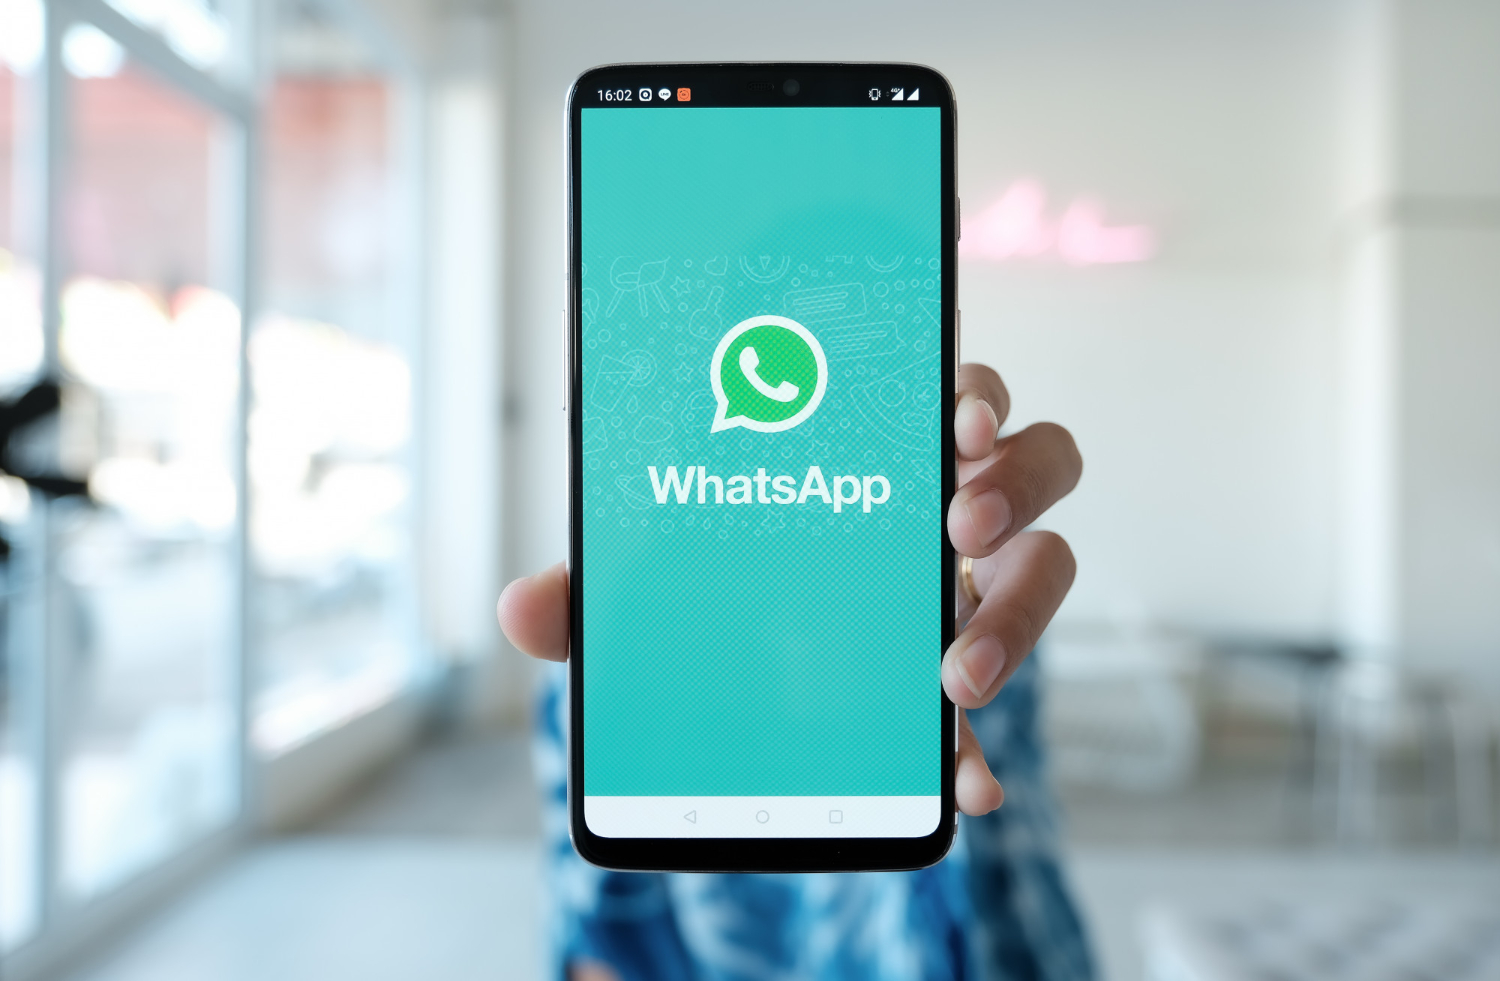 You can now speed up your audios on WhatsApp